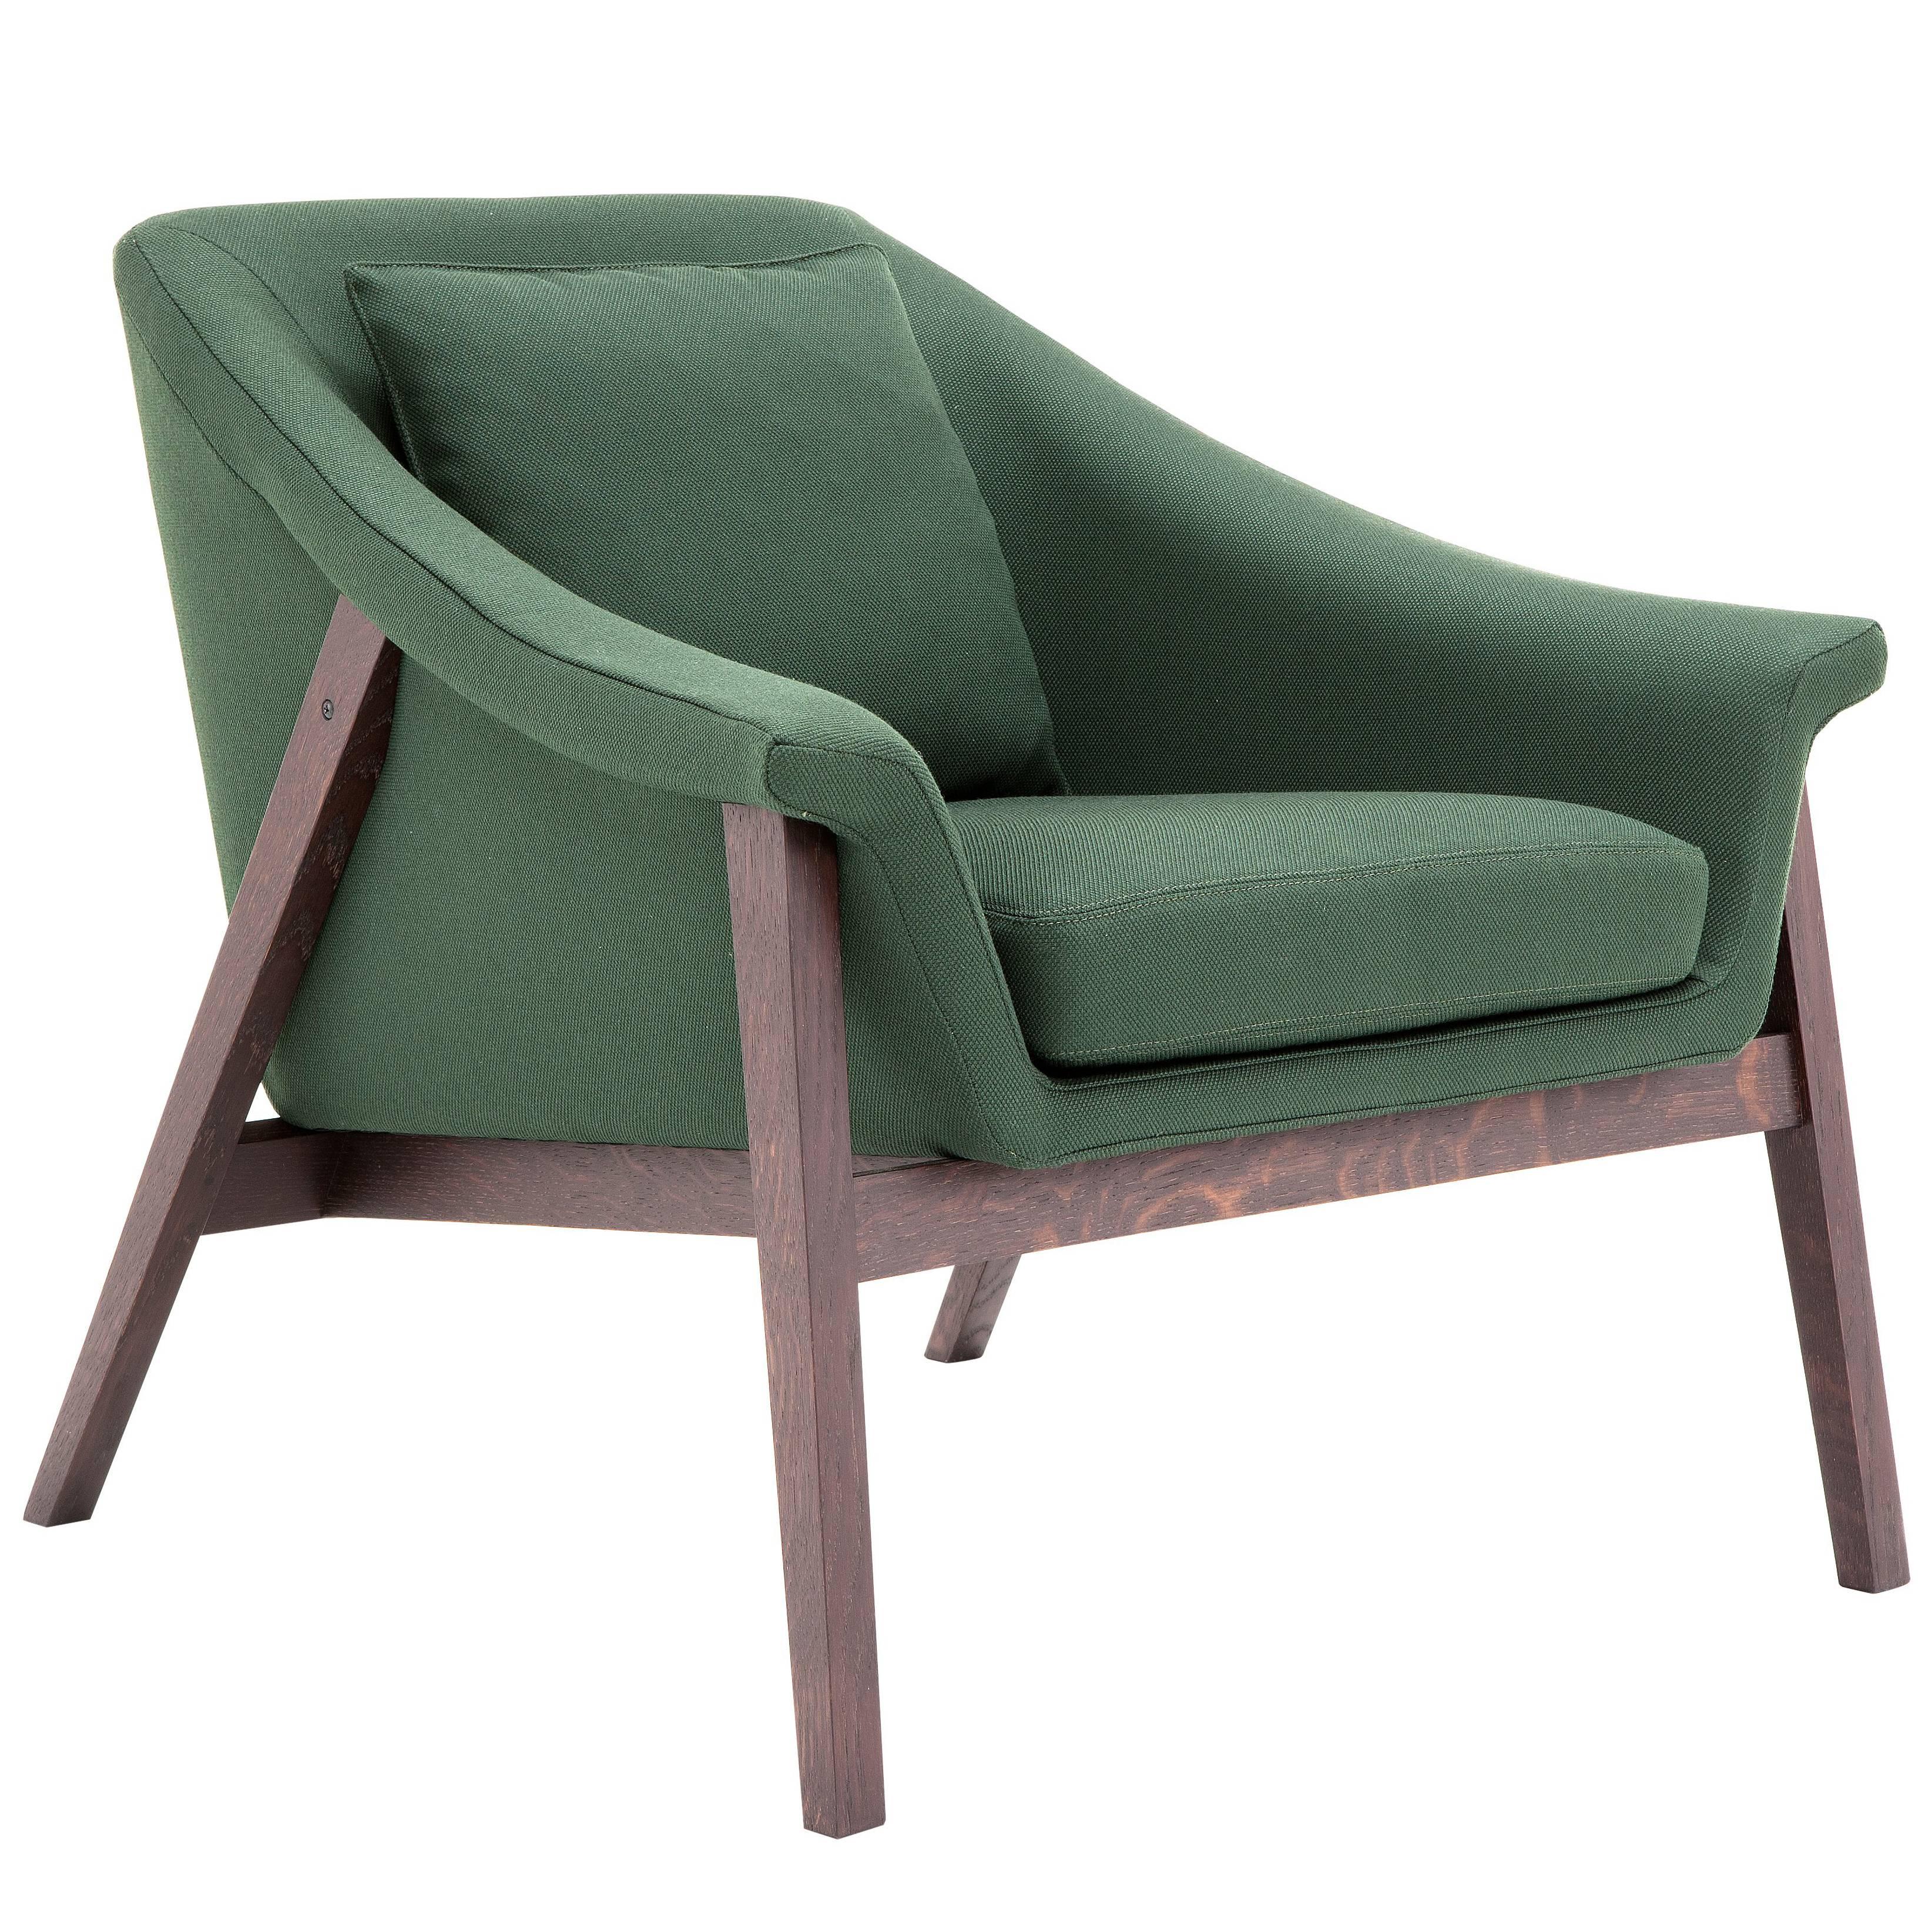 Gaia Armchair in Forest Green by Maurizio Marconato & Terry Zappa For Sale